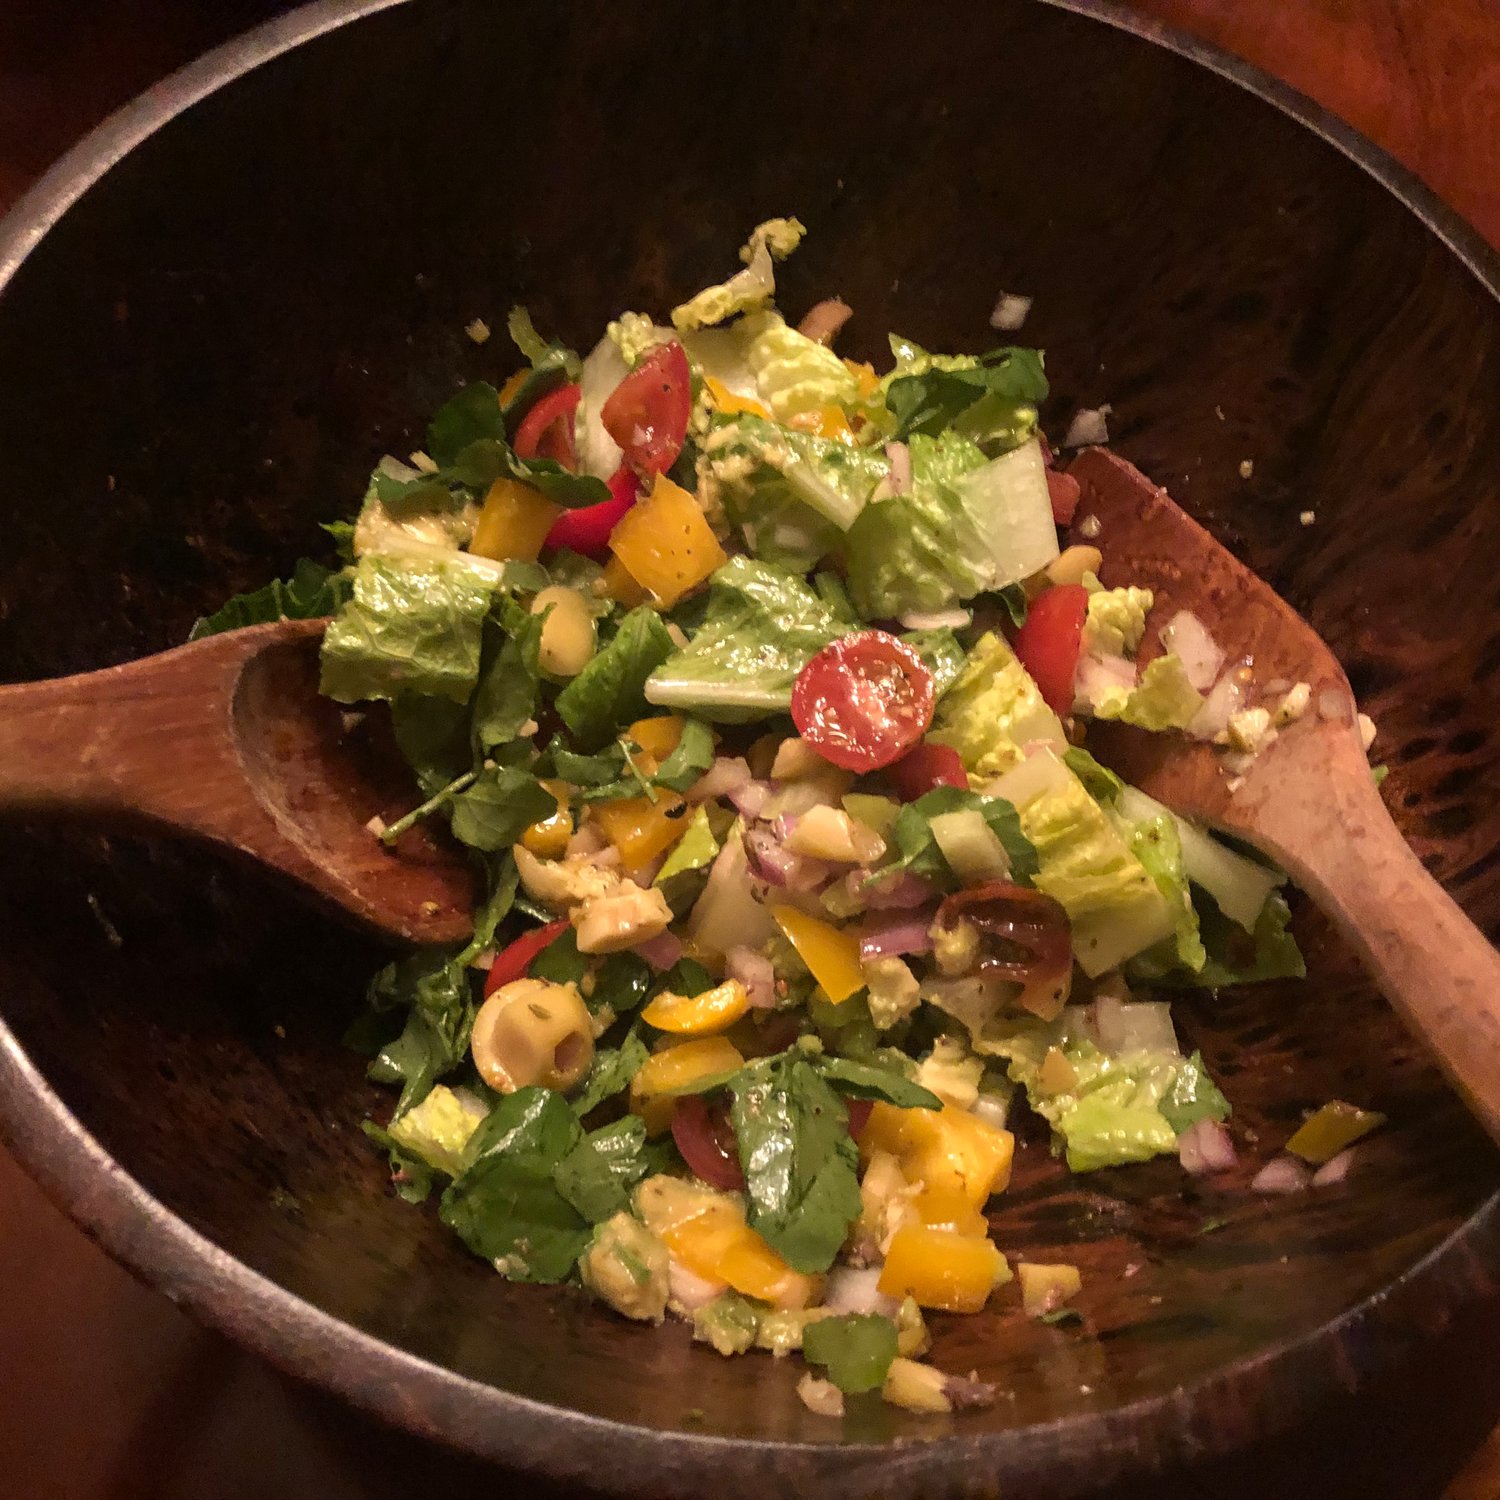 The Steak House Salad from the Rose Pistola Cookbook features bright flavors from olives, cherry tomatoes, avocado and peppers, tossed in a red wine vinaigrette.